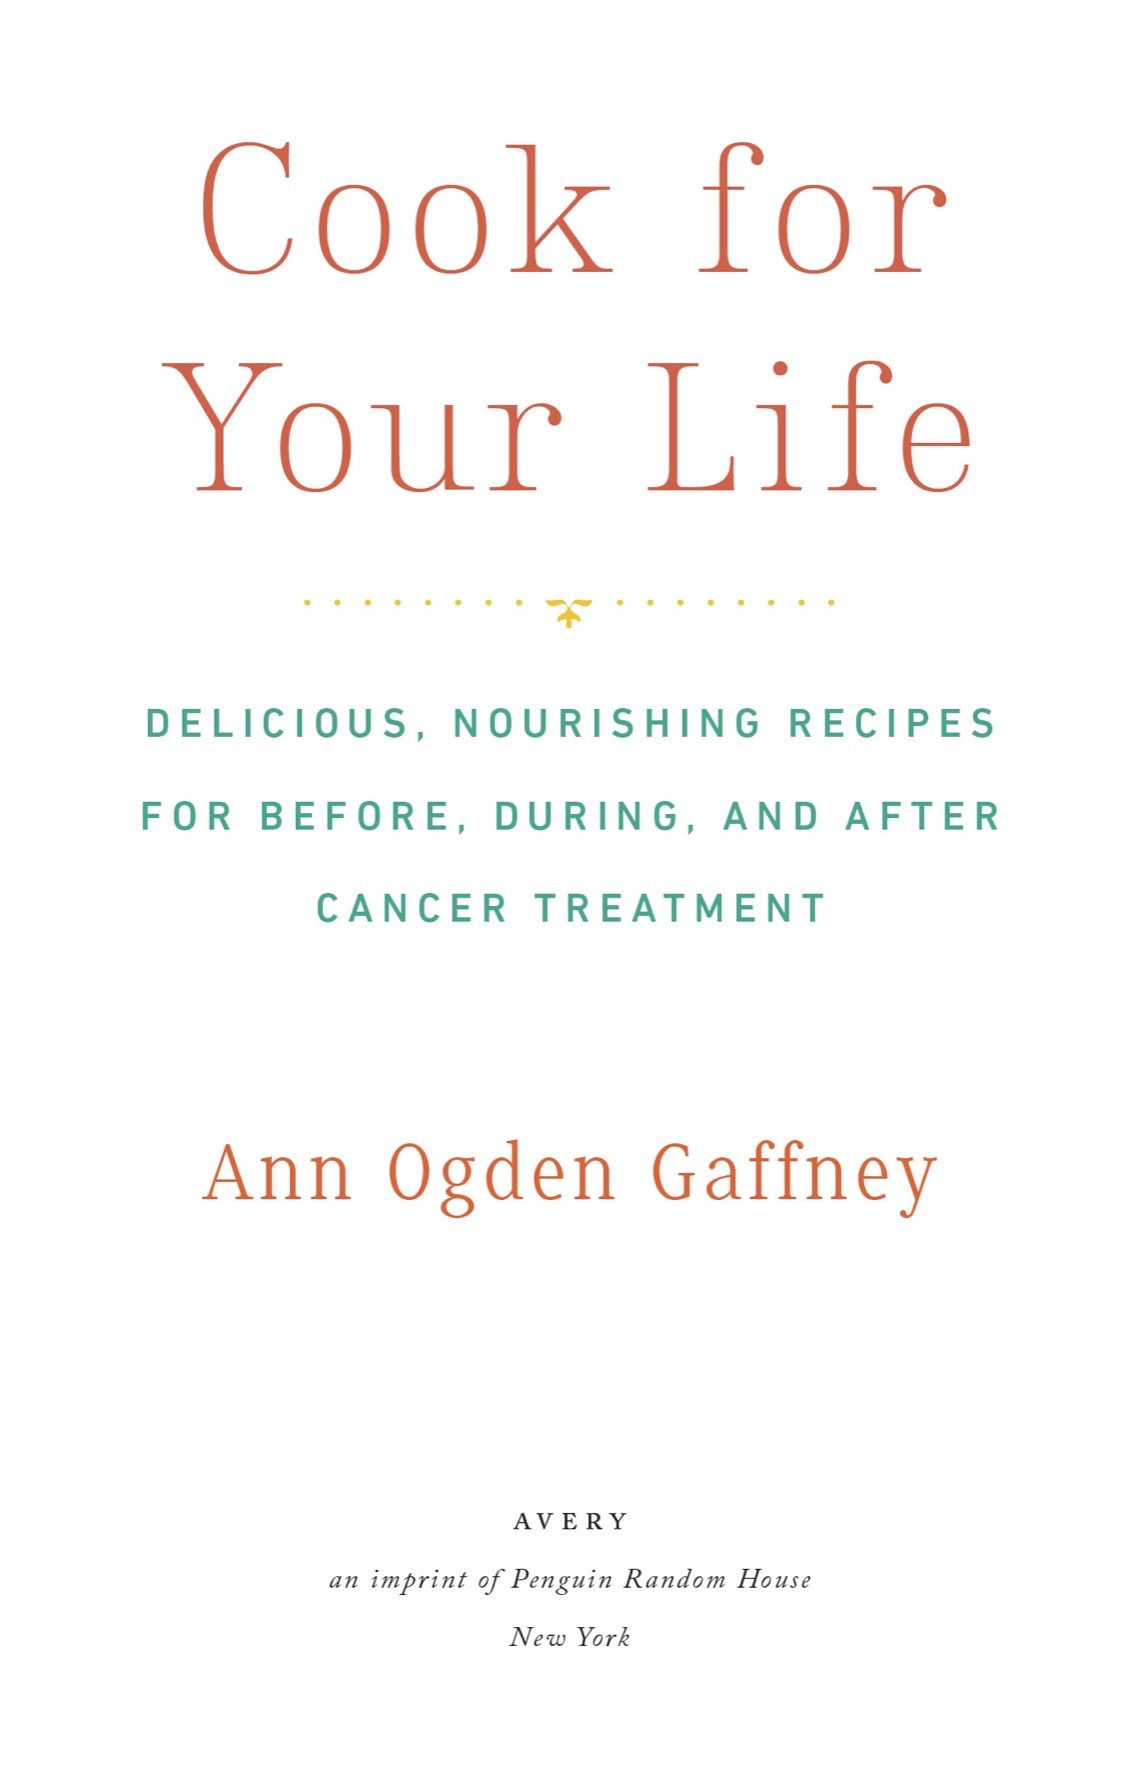 Cook for your life delicious nourishing recipes for before during and after cancer treatment - image 3